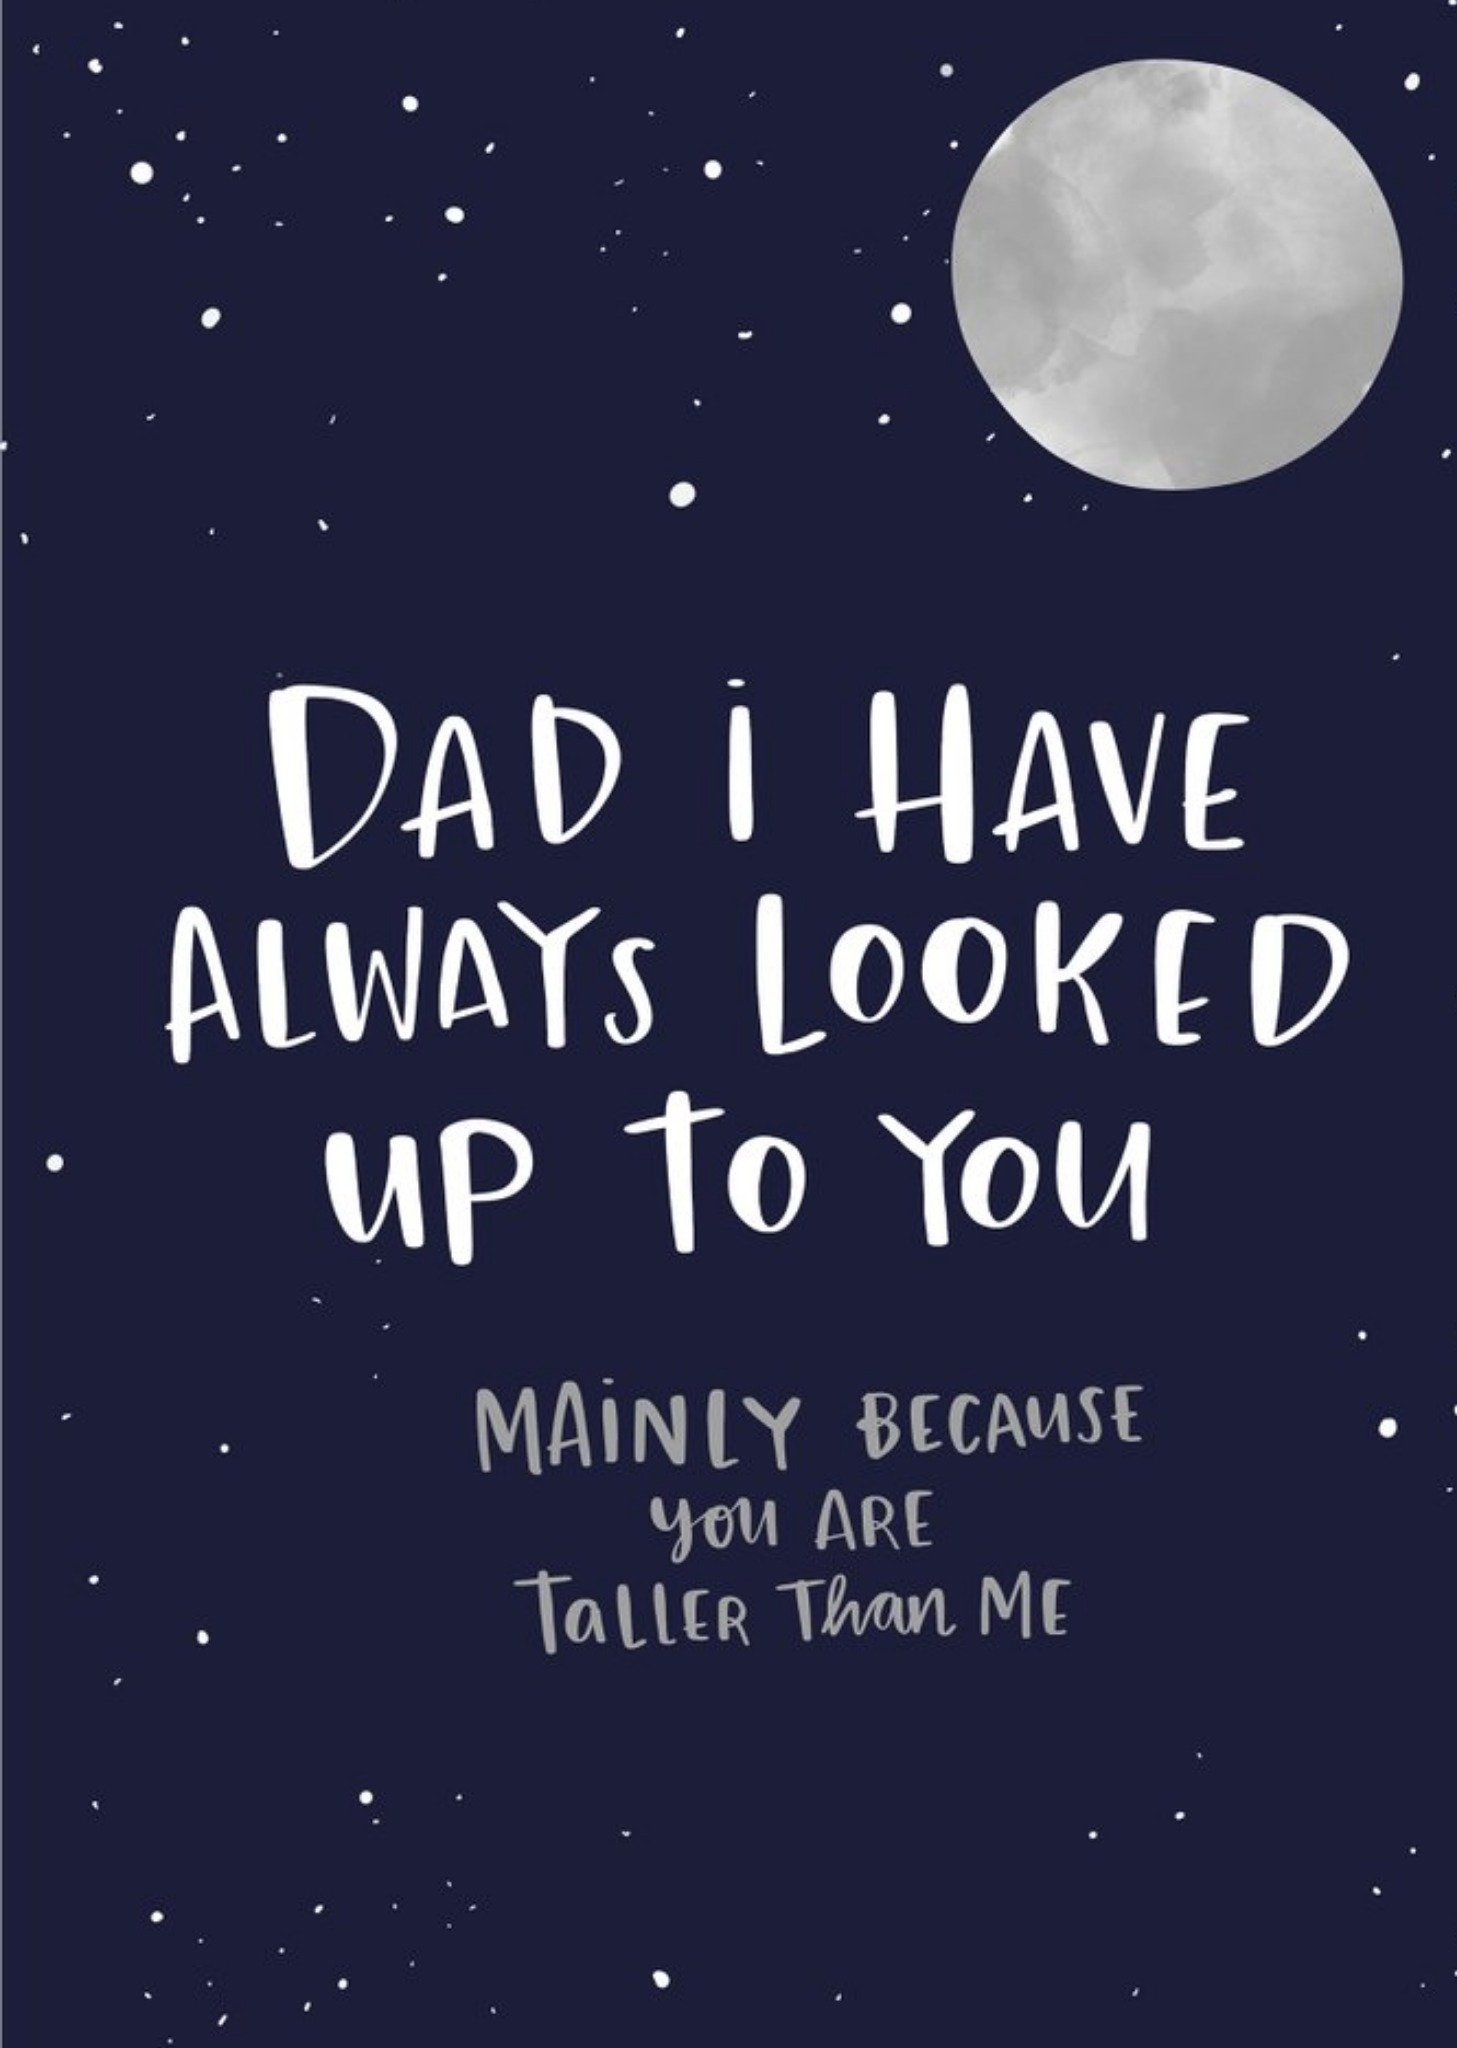 Moonpig Lucy Maggie Looked Up To You Funny Father's Day Card Ecard